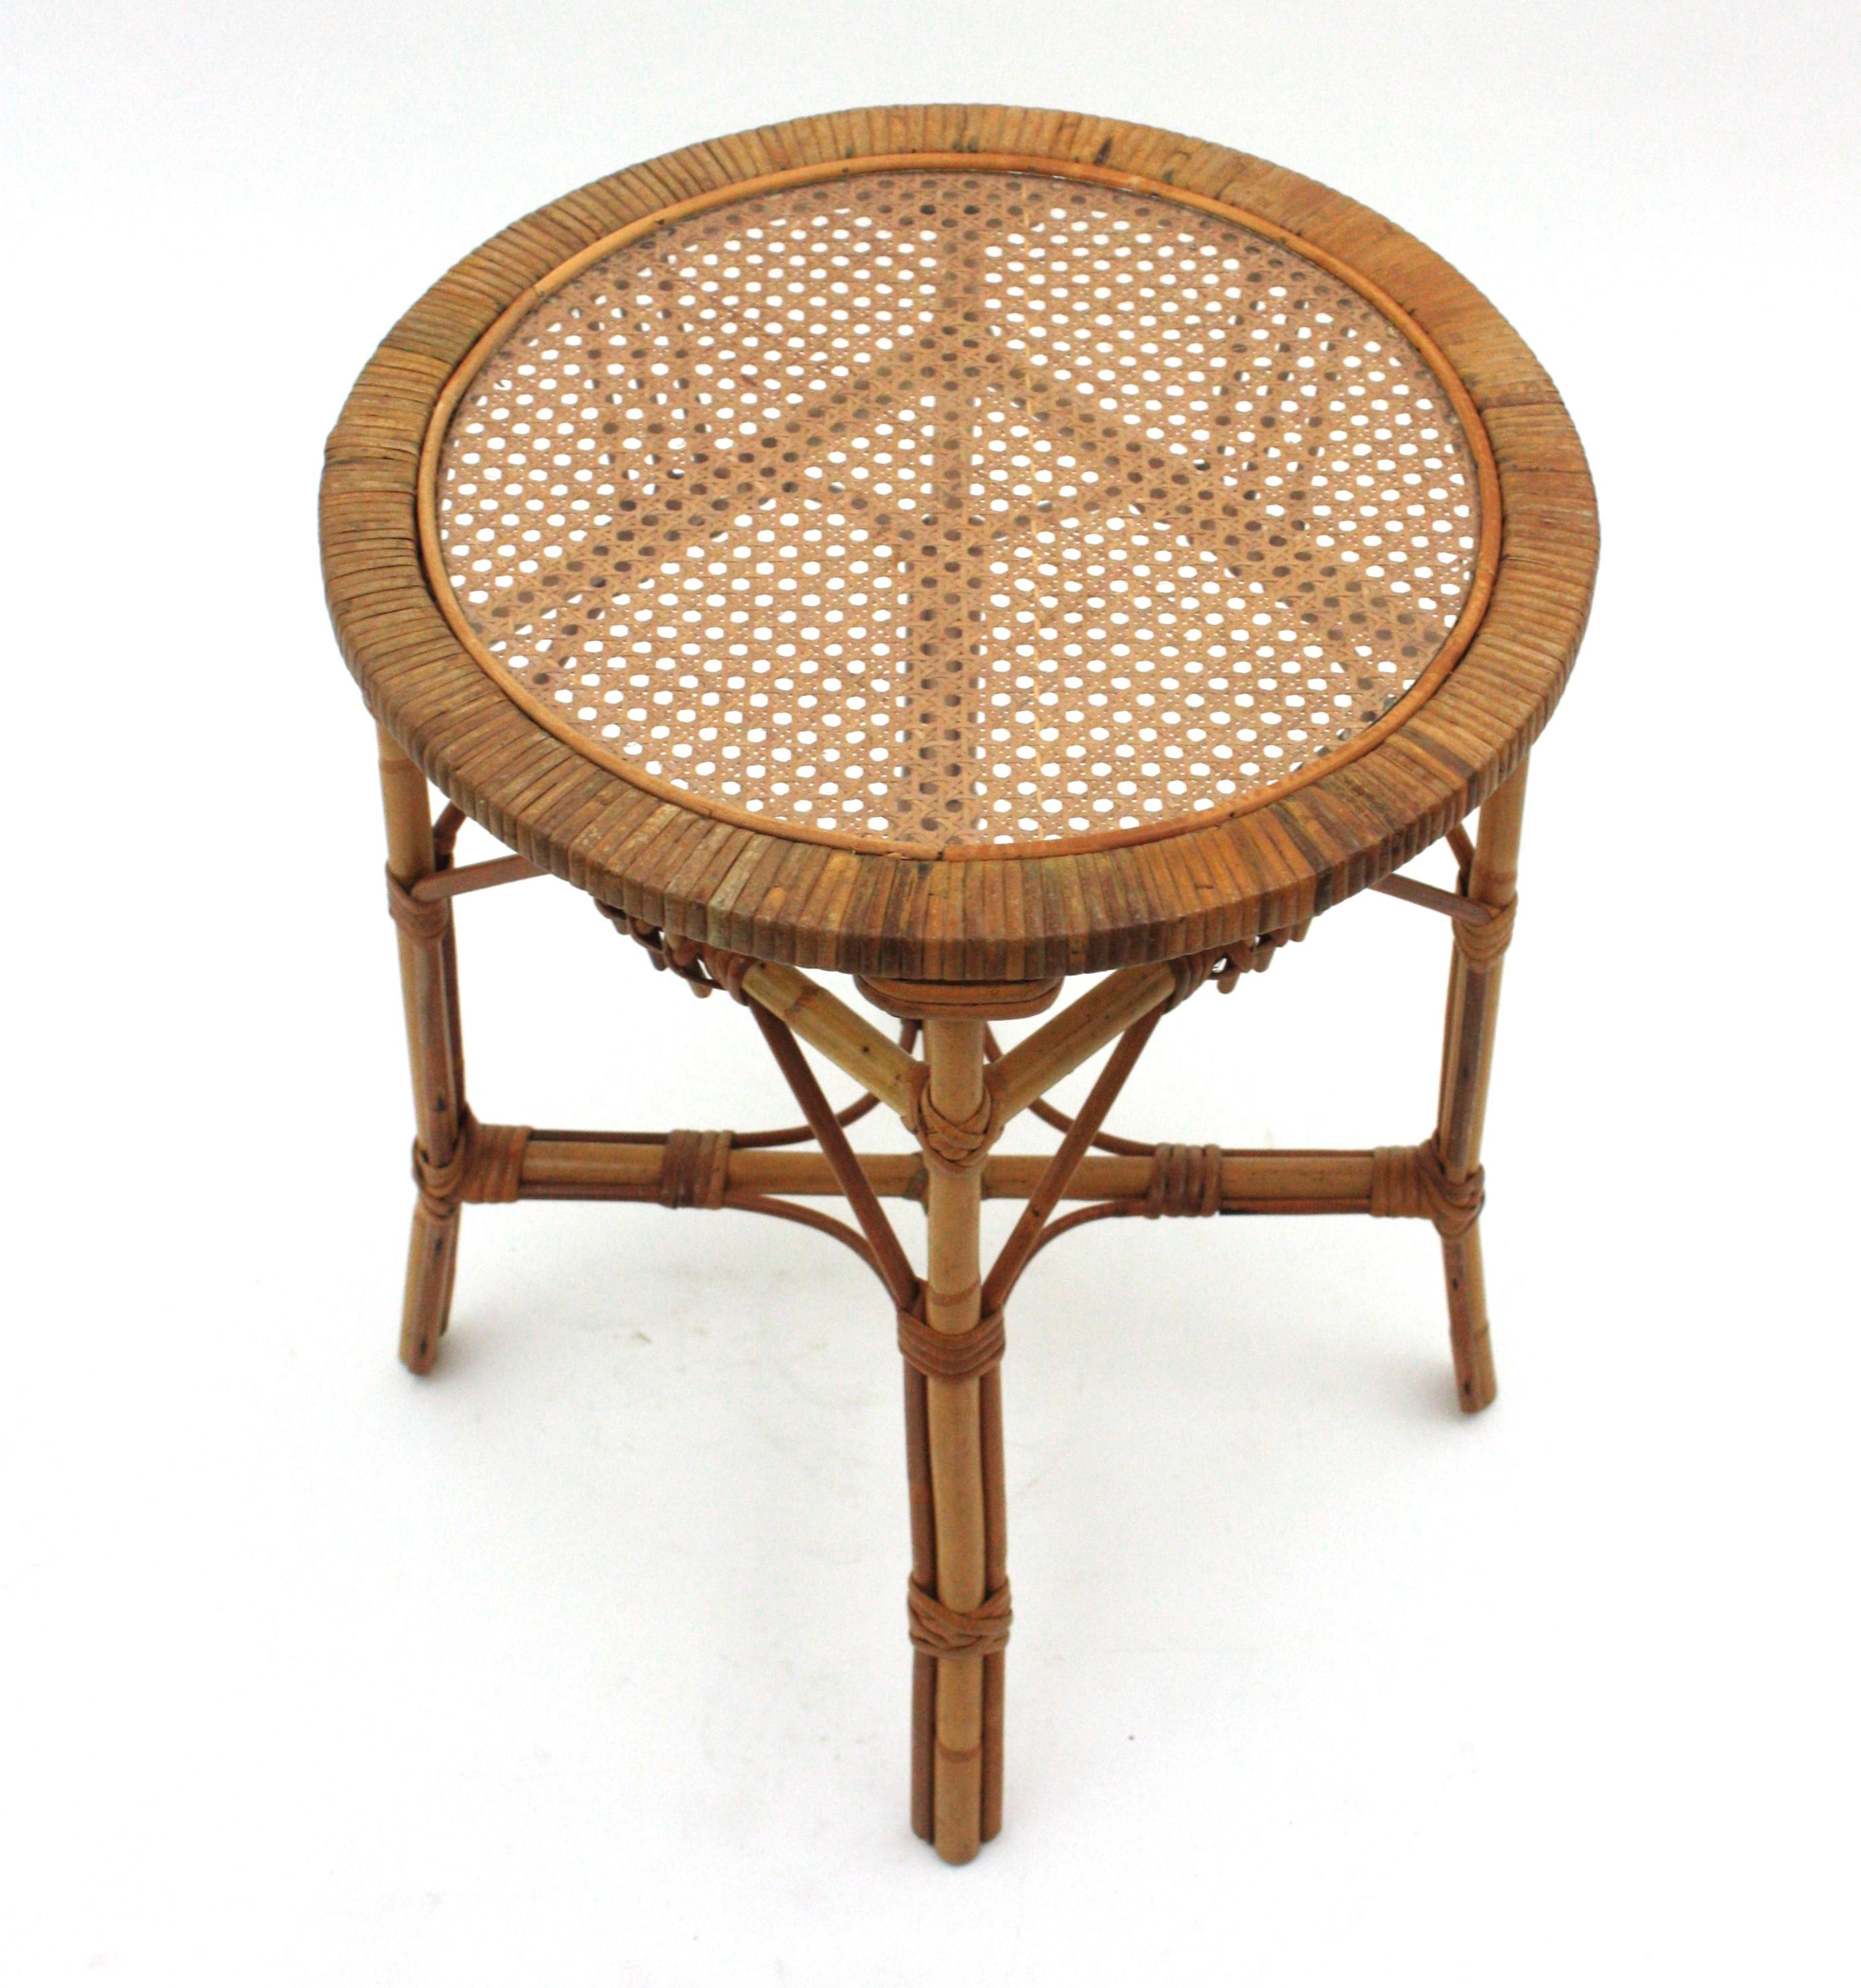 Mid-Century Modern Rattan Side Table with Woven Wicker Top, France, 1960s